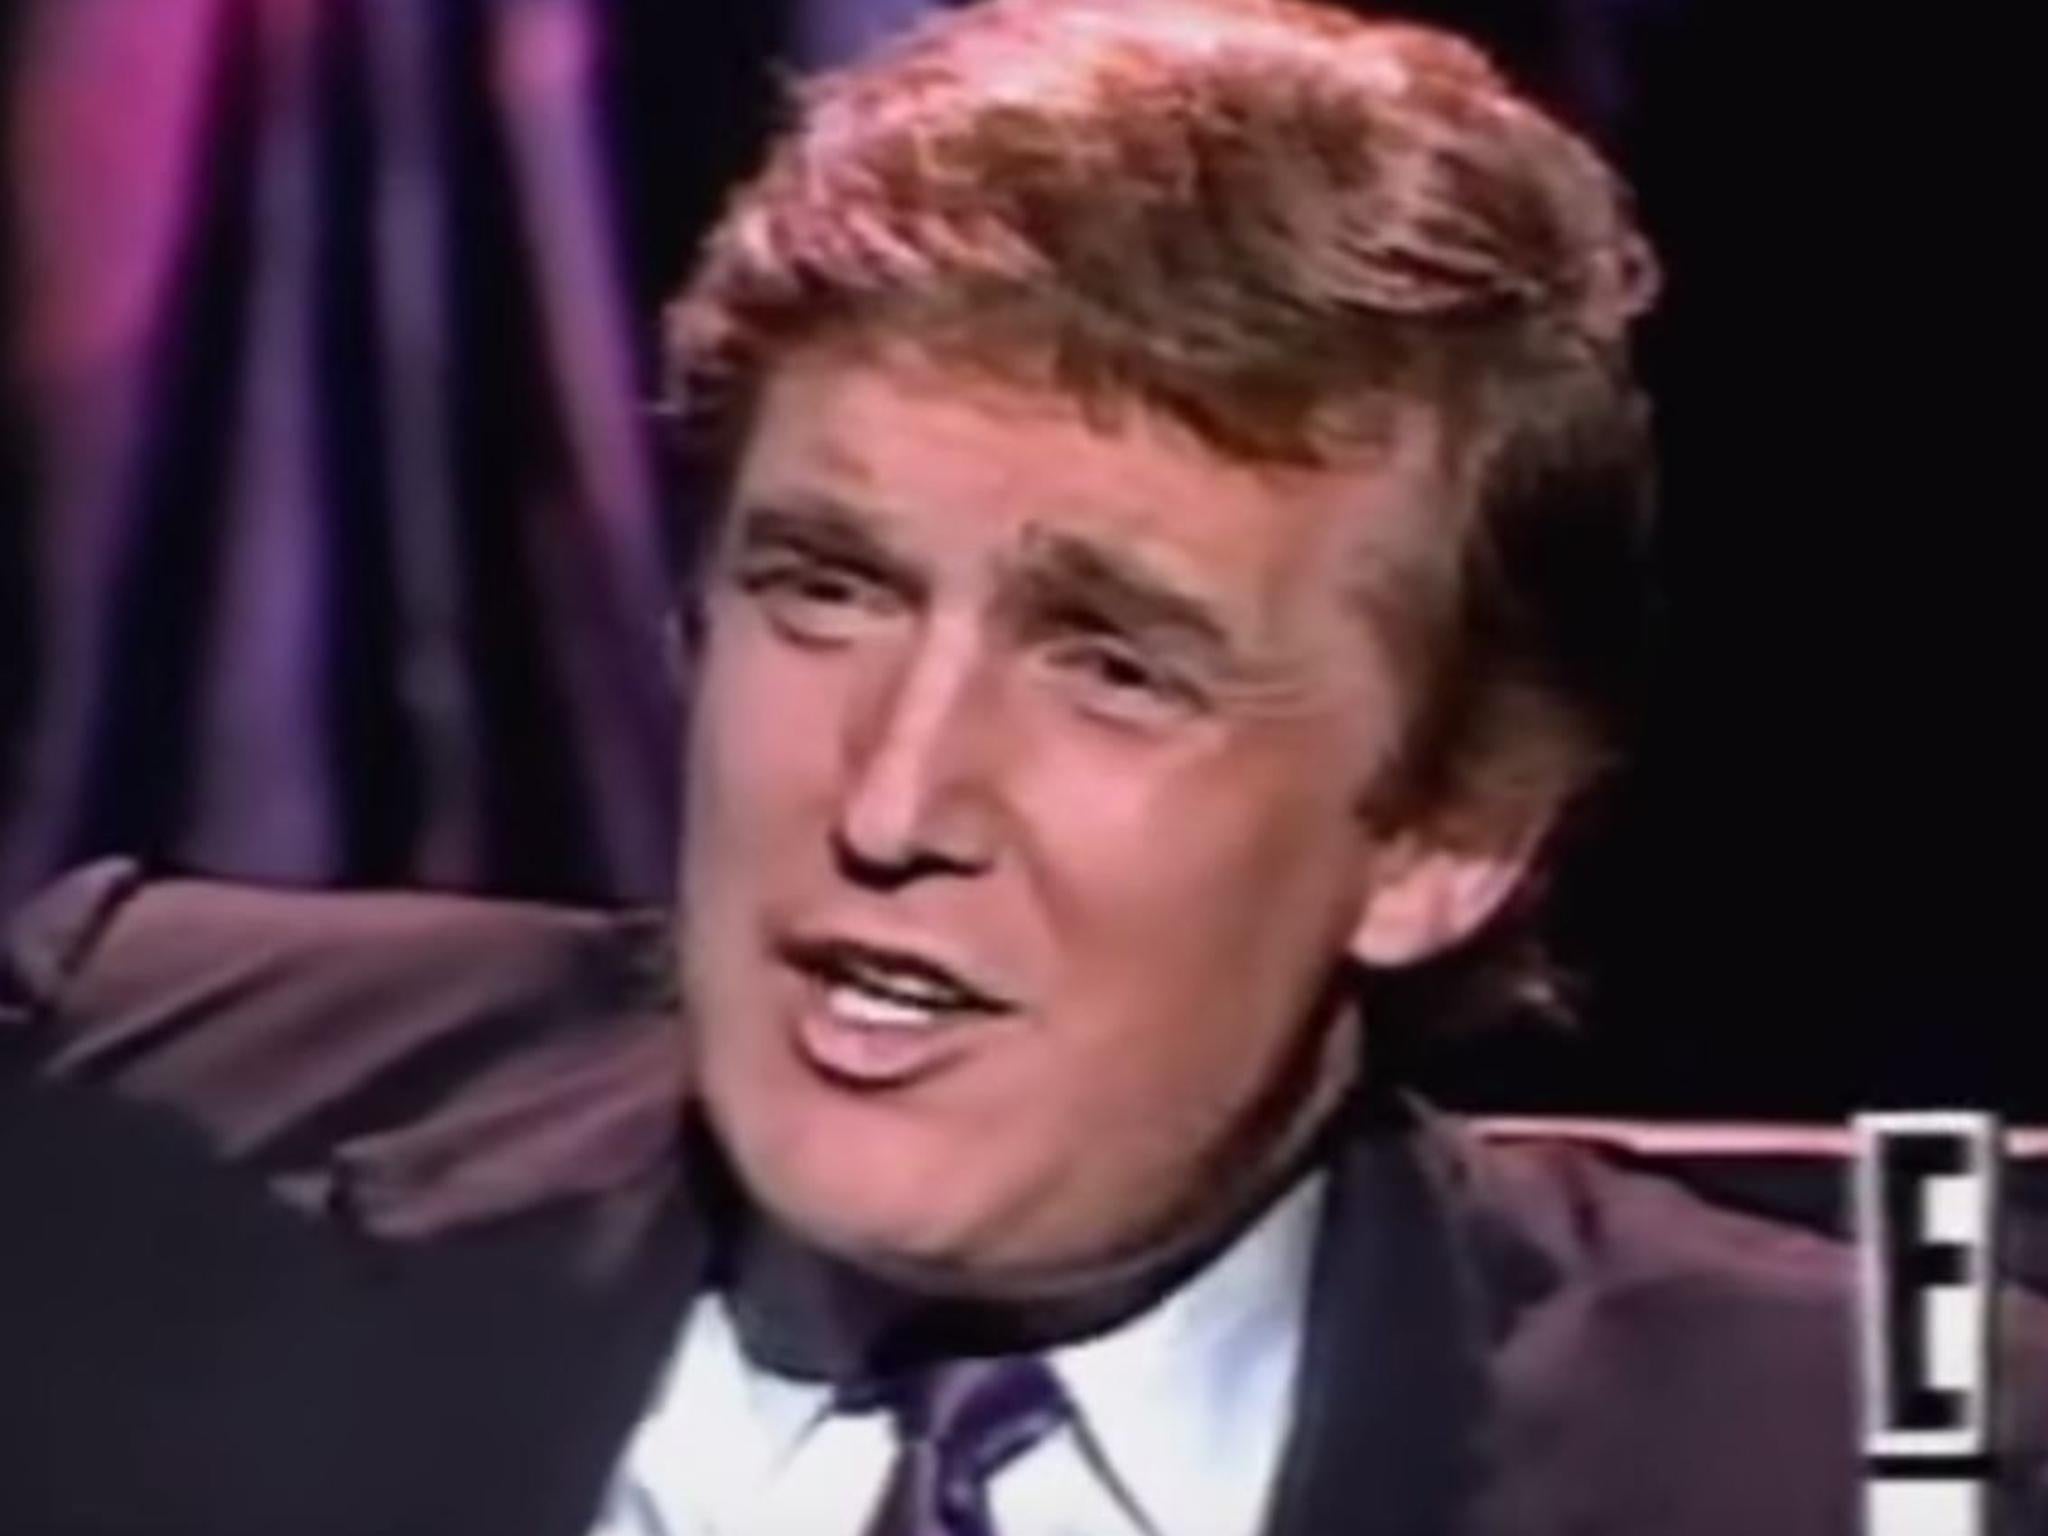 Donald Trump appears on E! during an interview with shock jock Howard Stern, in May 1993